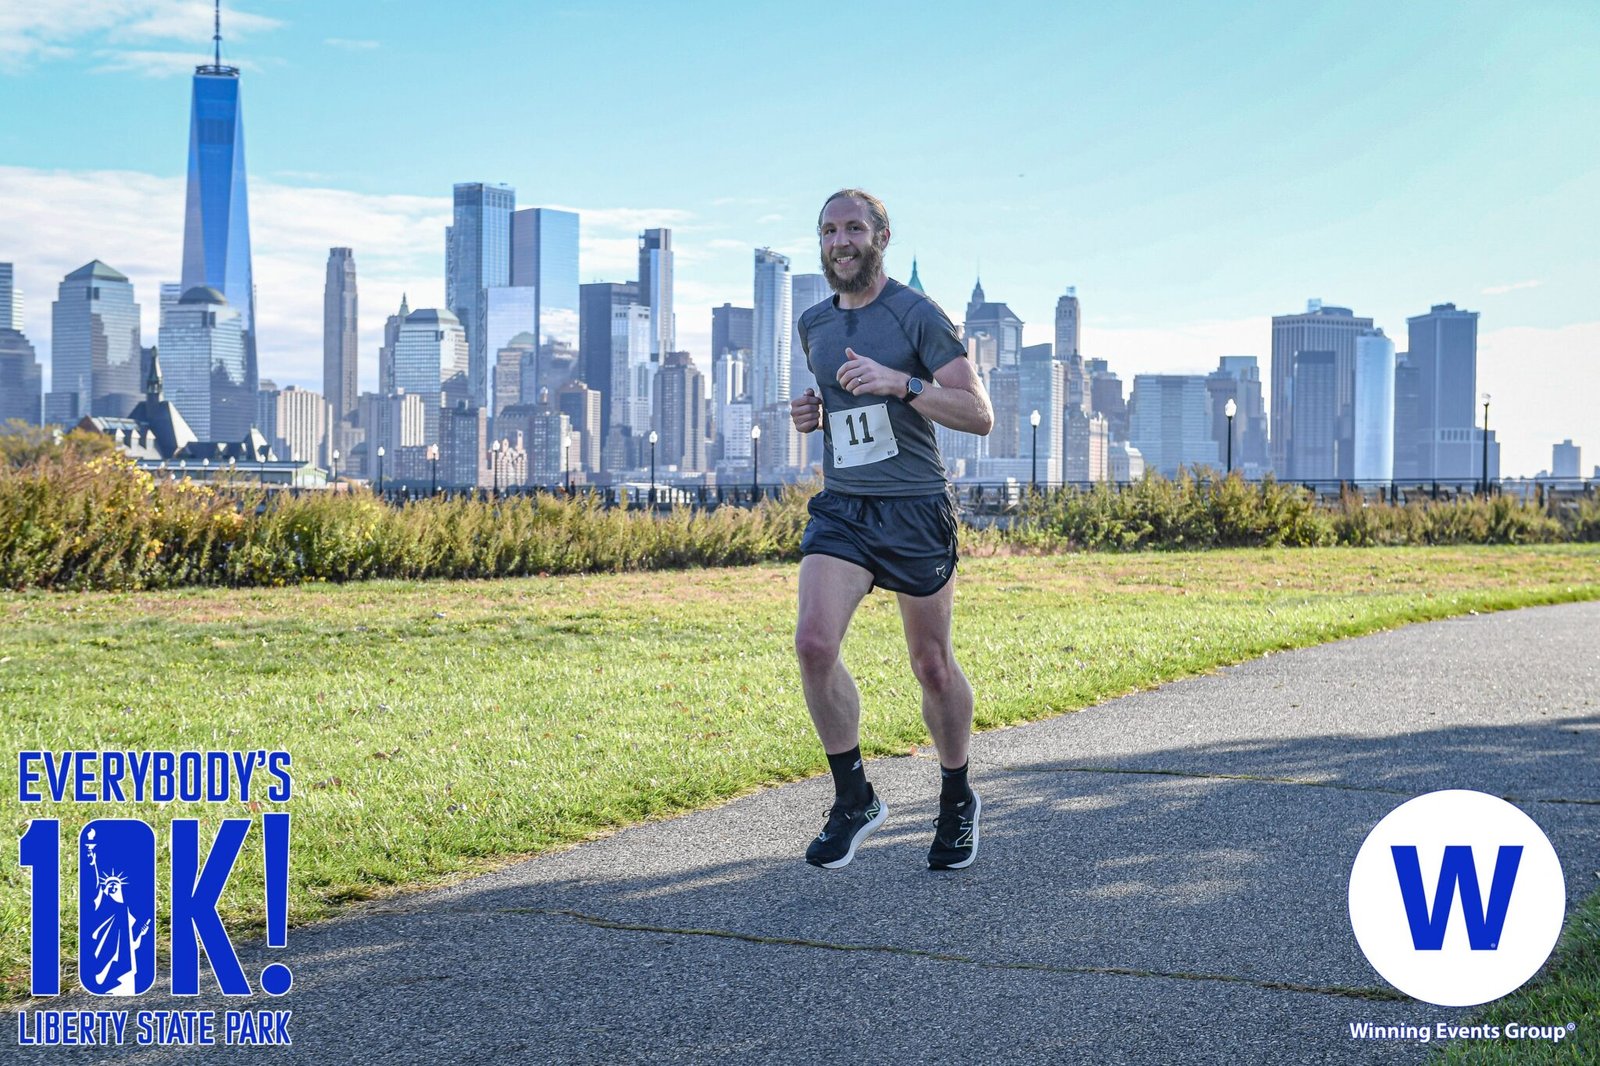 Me, running the Everybodys 10k Race at Liberty State Park, with the Manhattan Skyline in the background.